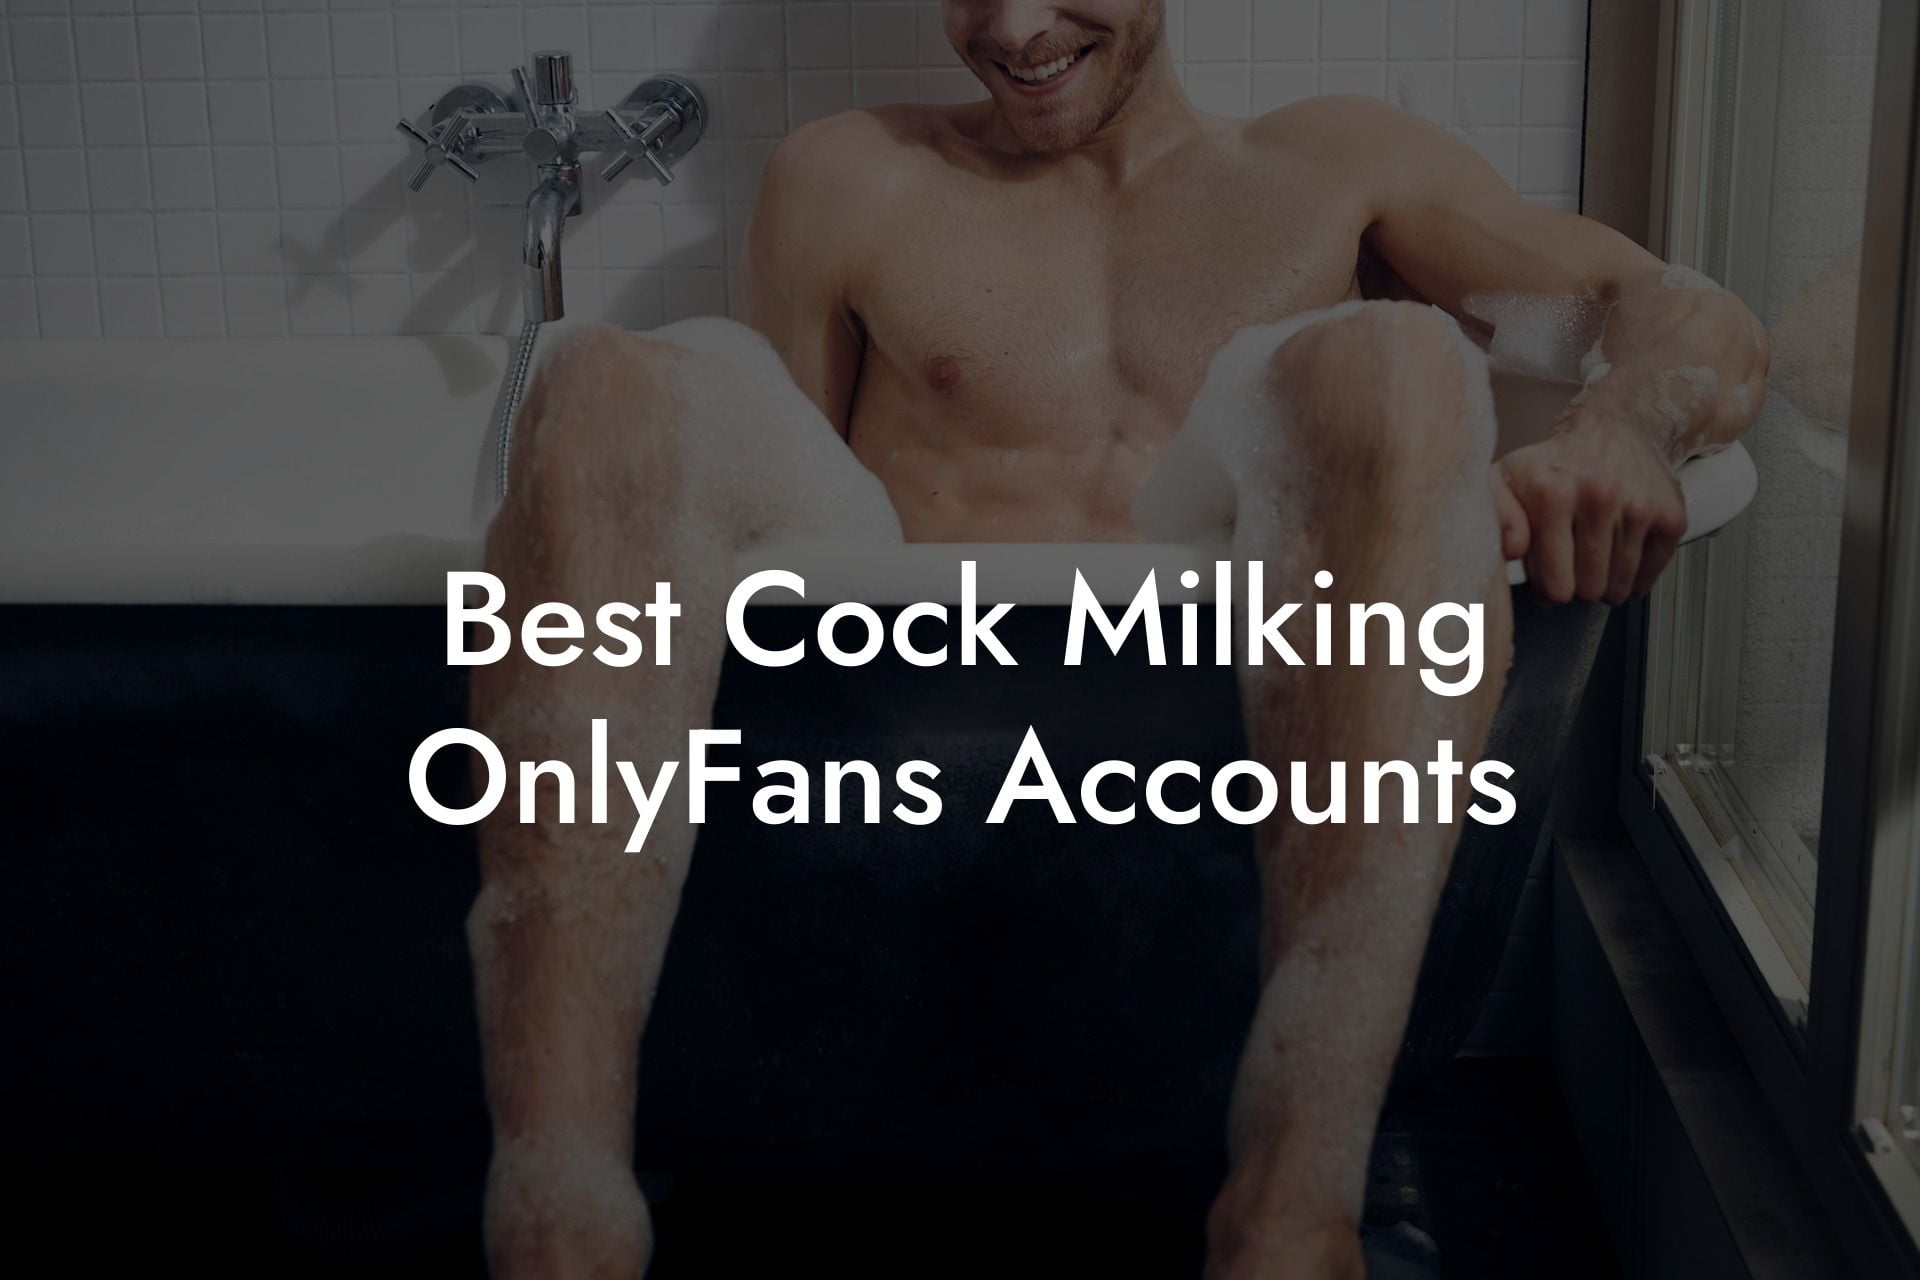 Best Cock Milking OnlyFans Accounts